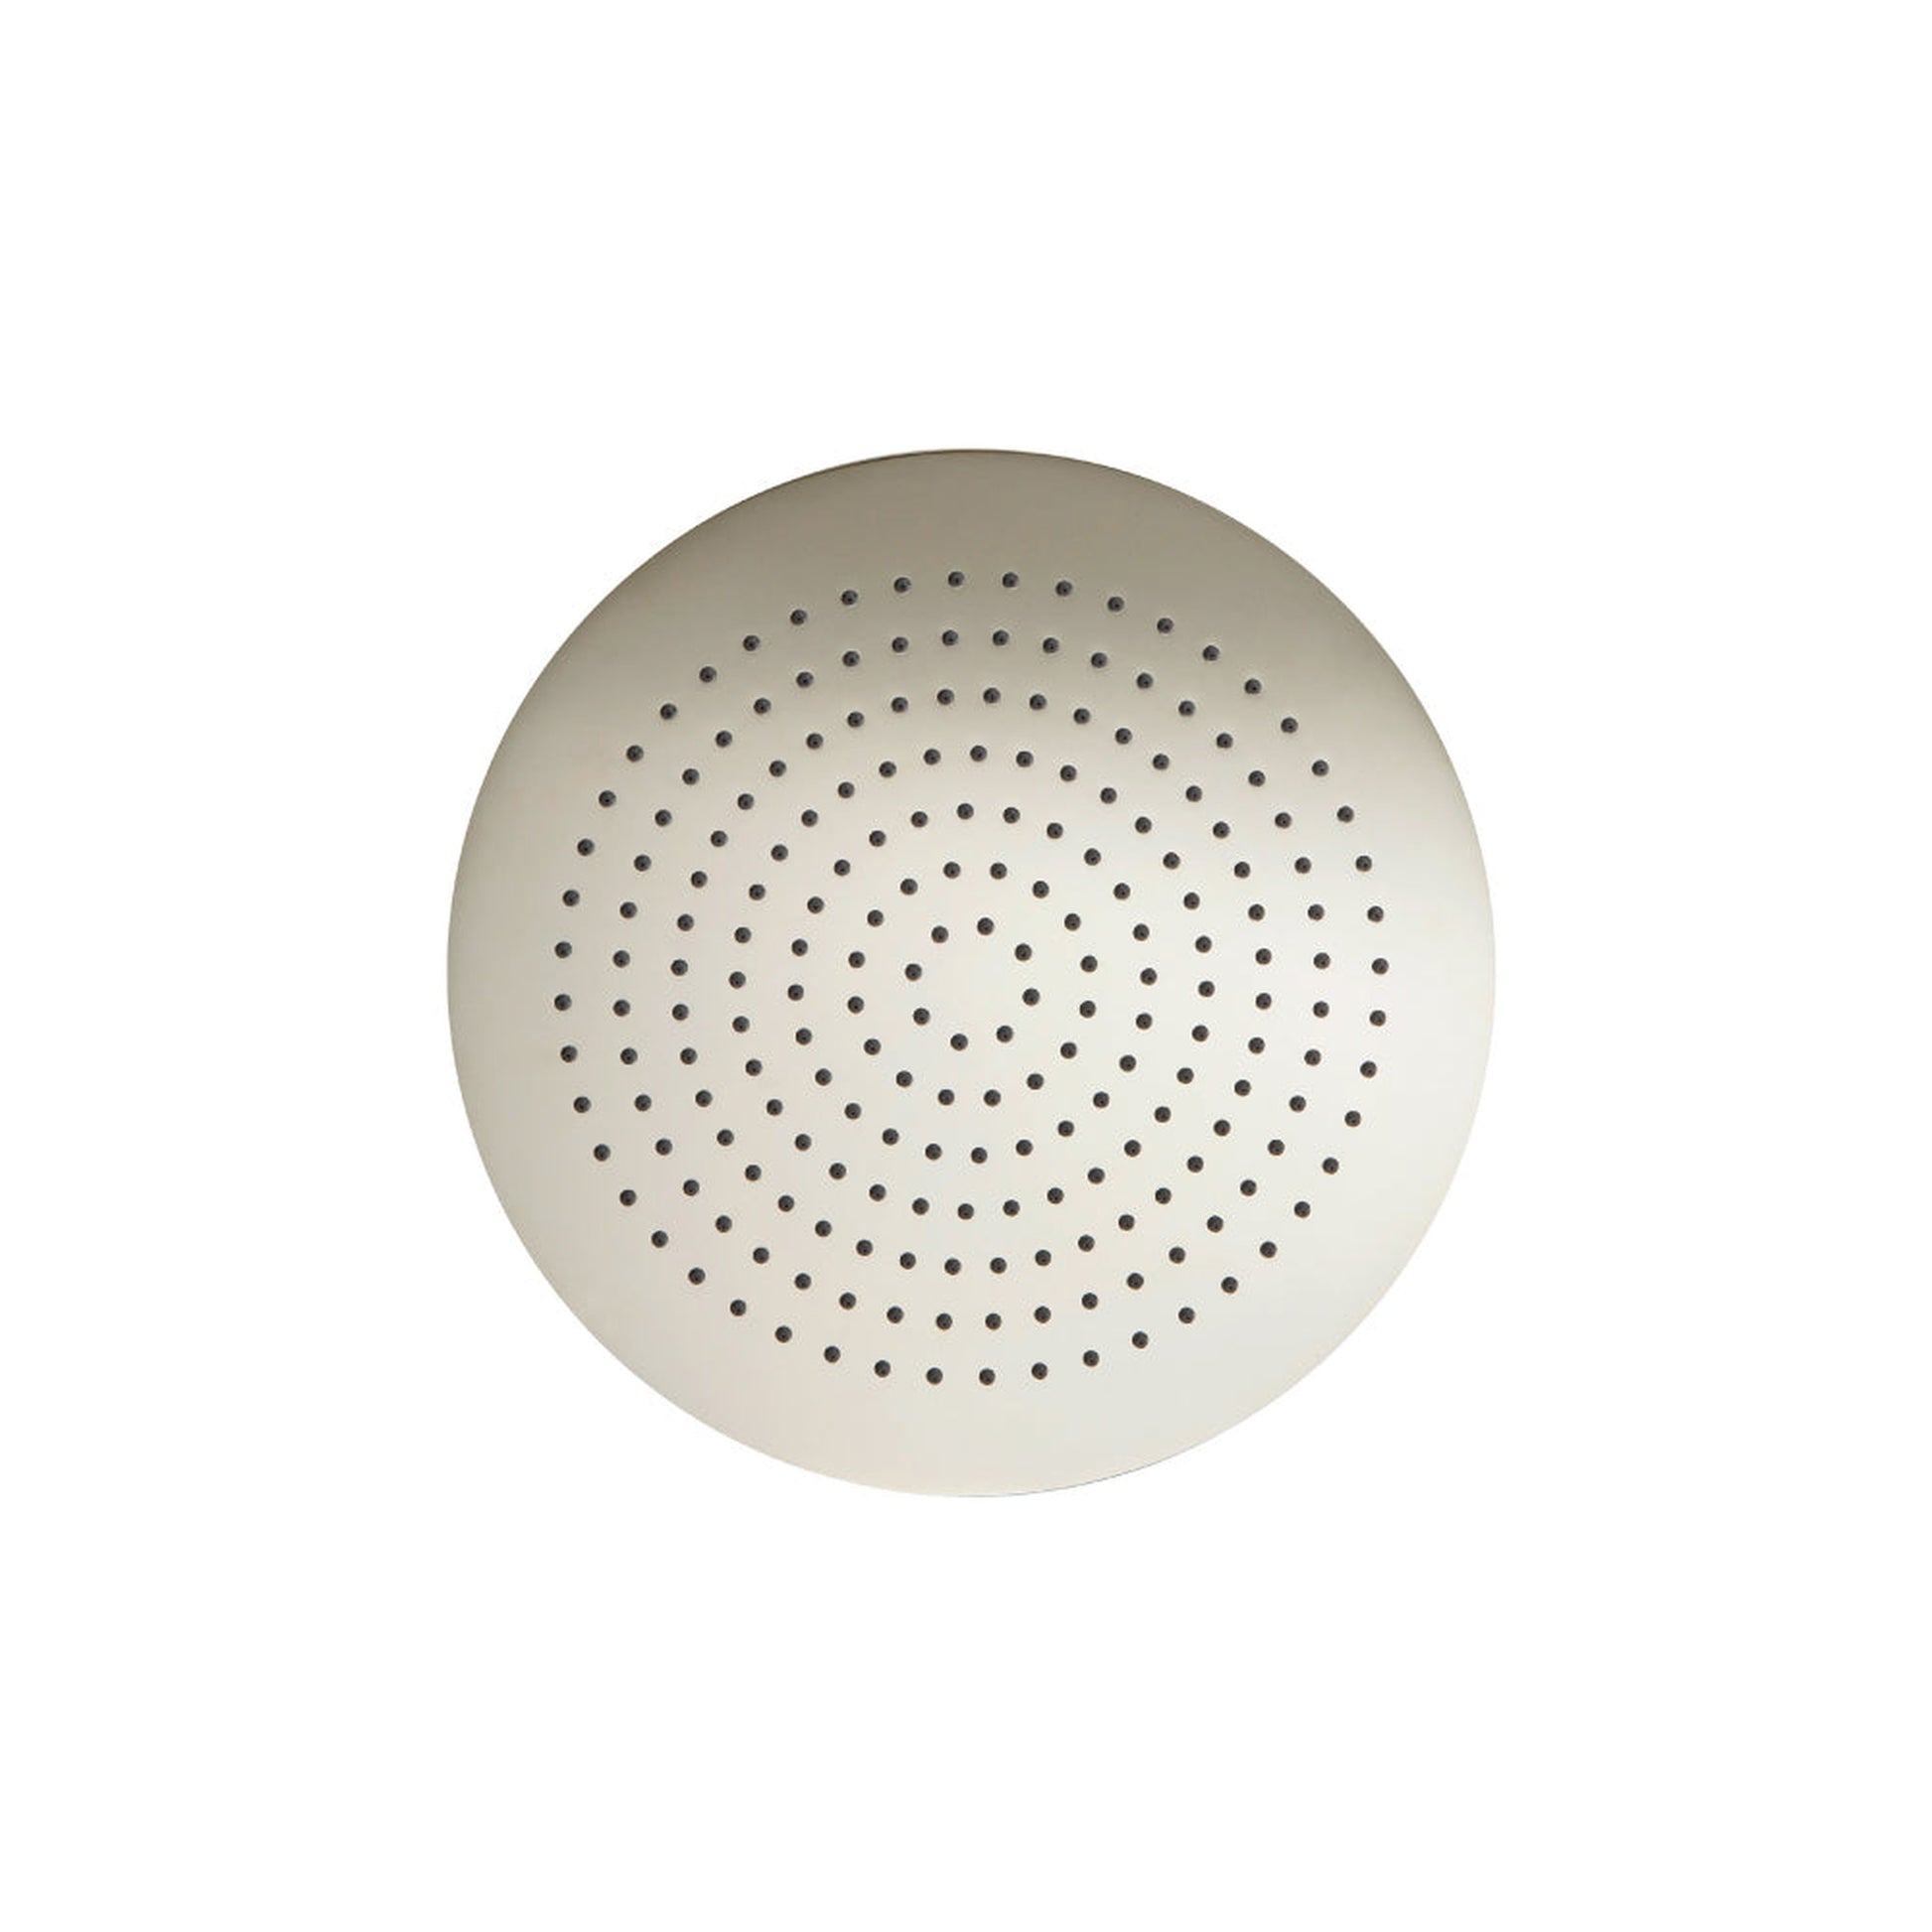 Isenberg Universal Fixtures 10" Single Function Round Polished Nickel PVD Solid Brass Rain Shower Head